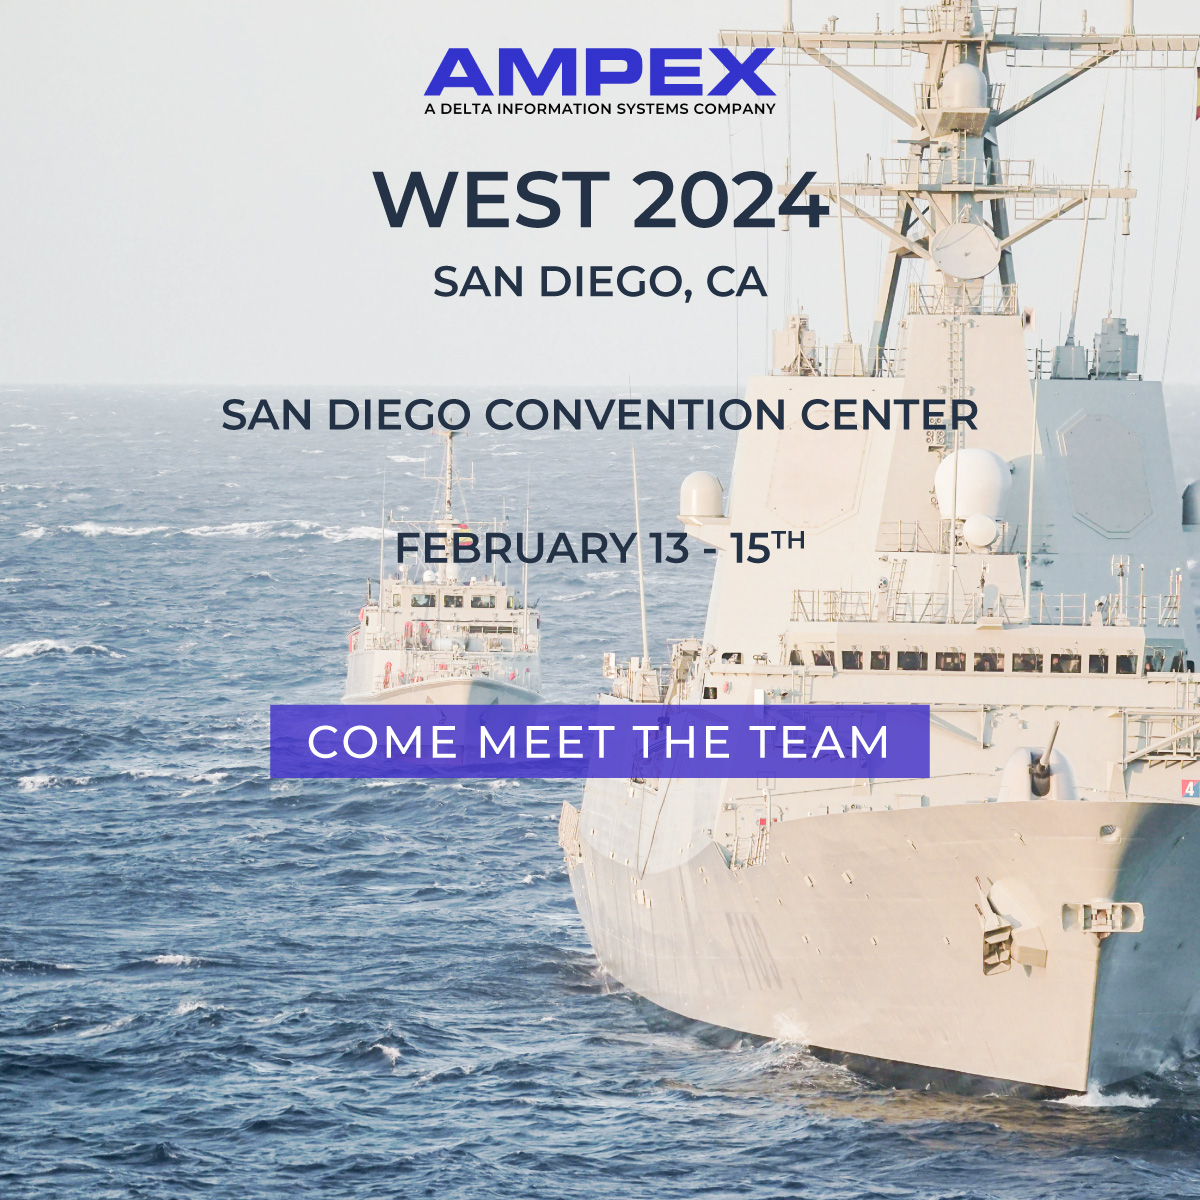 AFCEA West 2024 AMPEX Data Systems Corporation